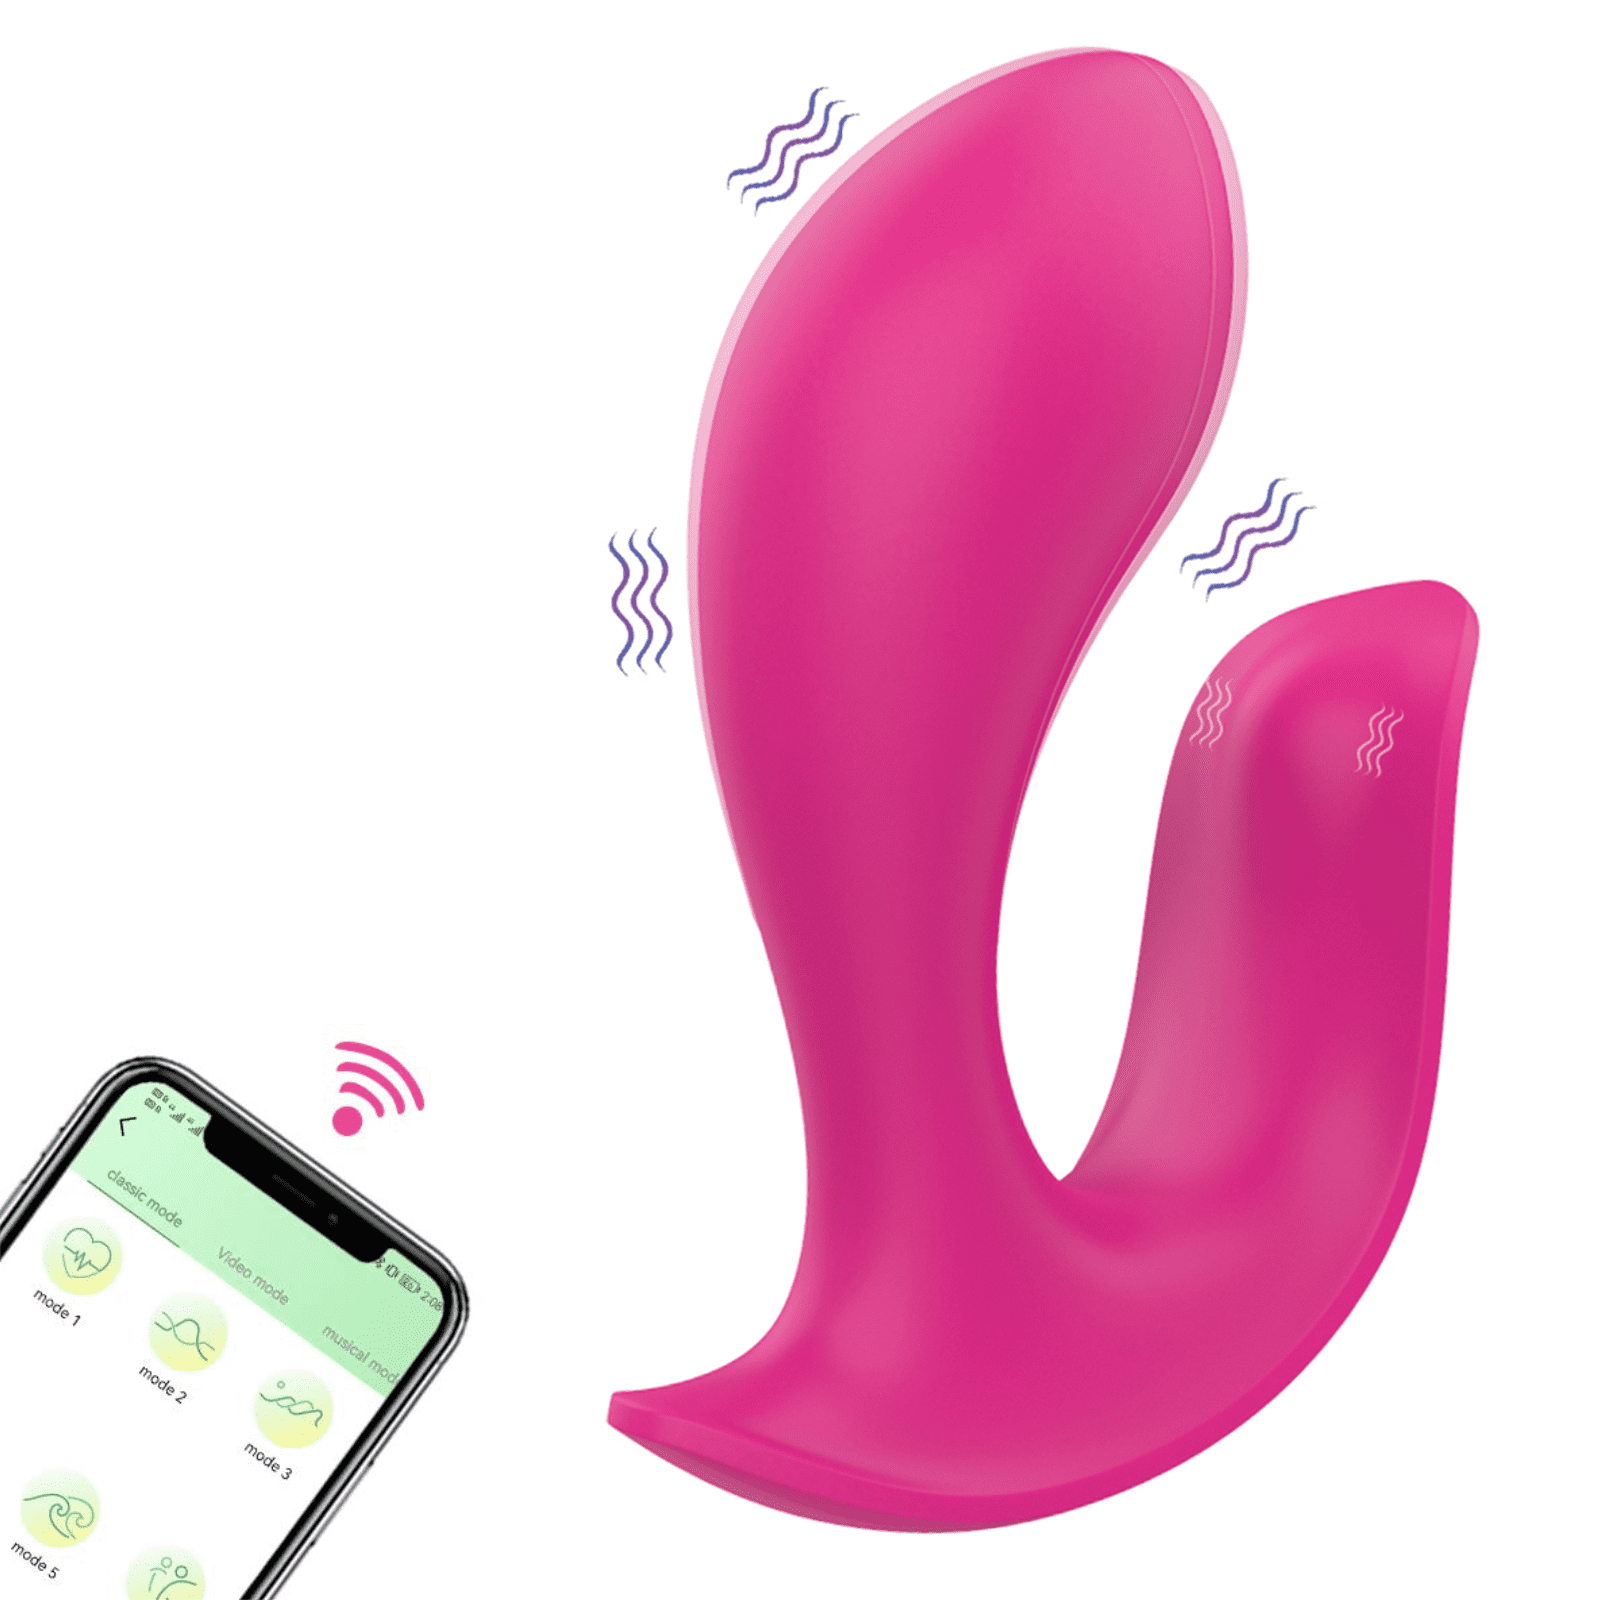 TLUDA Wearable Panty Vibrator with APP Remote Control for Women, G Spot Vibrator Dildo Stimulator Adult Sex Toy, photo